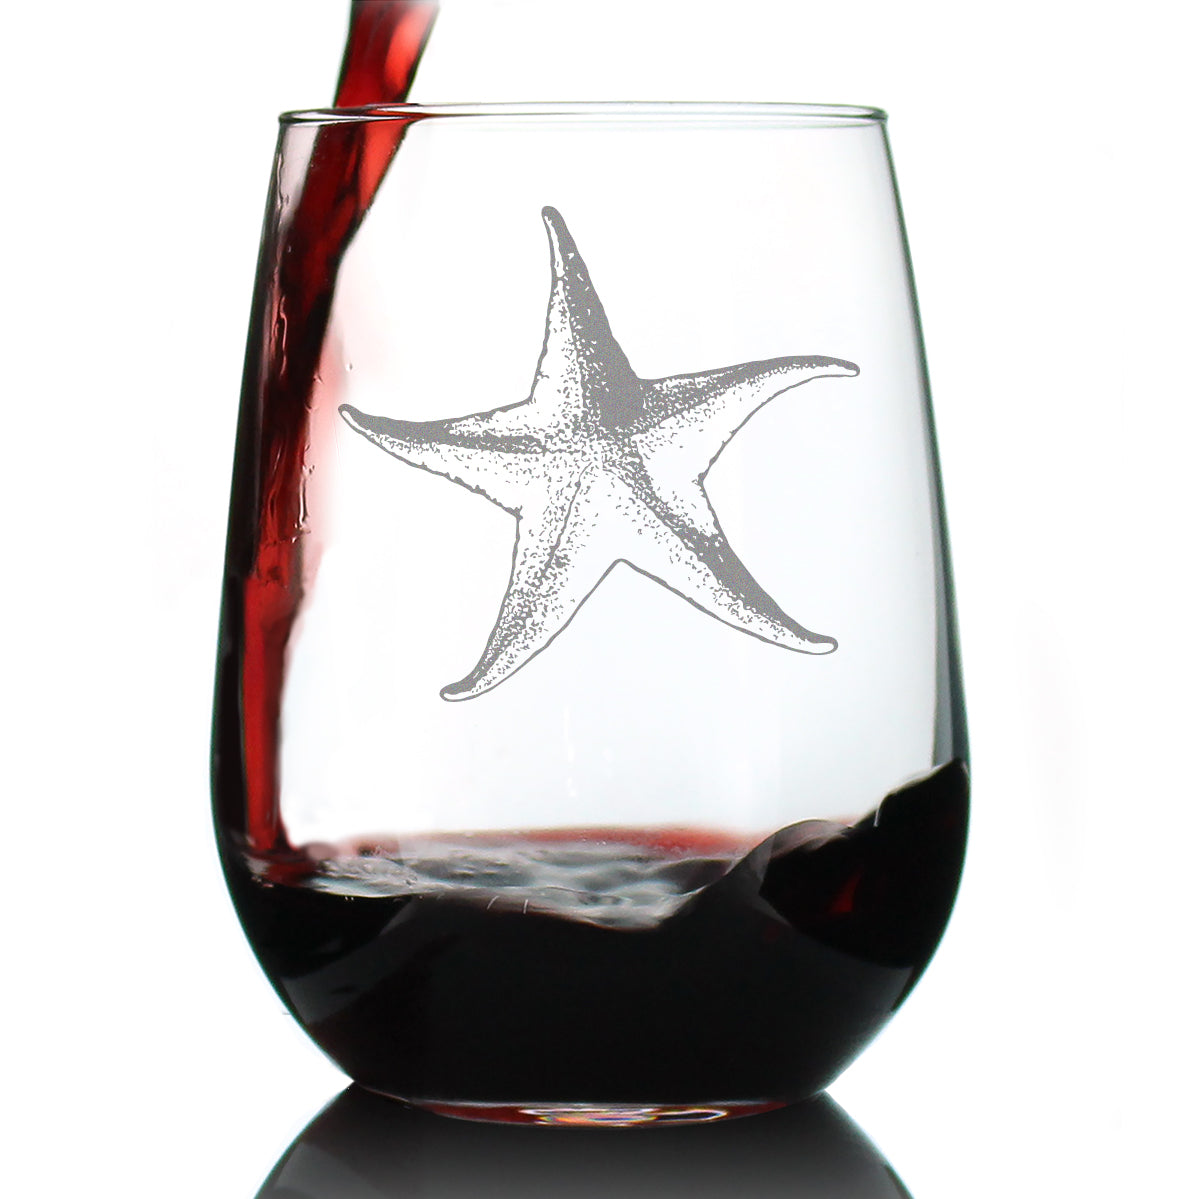 Starfish Stemless Wine Glass - Beach Themed Decor and Decorative Ocean Glassware Gifts for Women and Men - Large 17 Oz Glasses